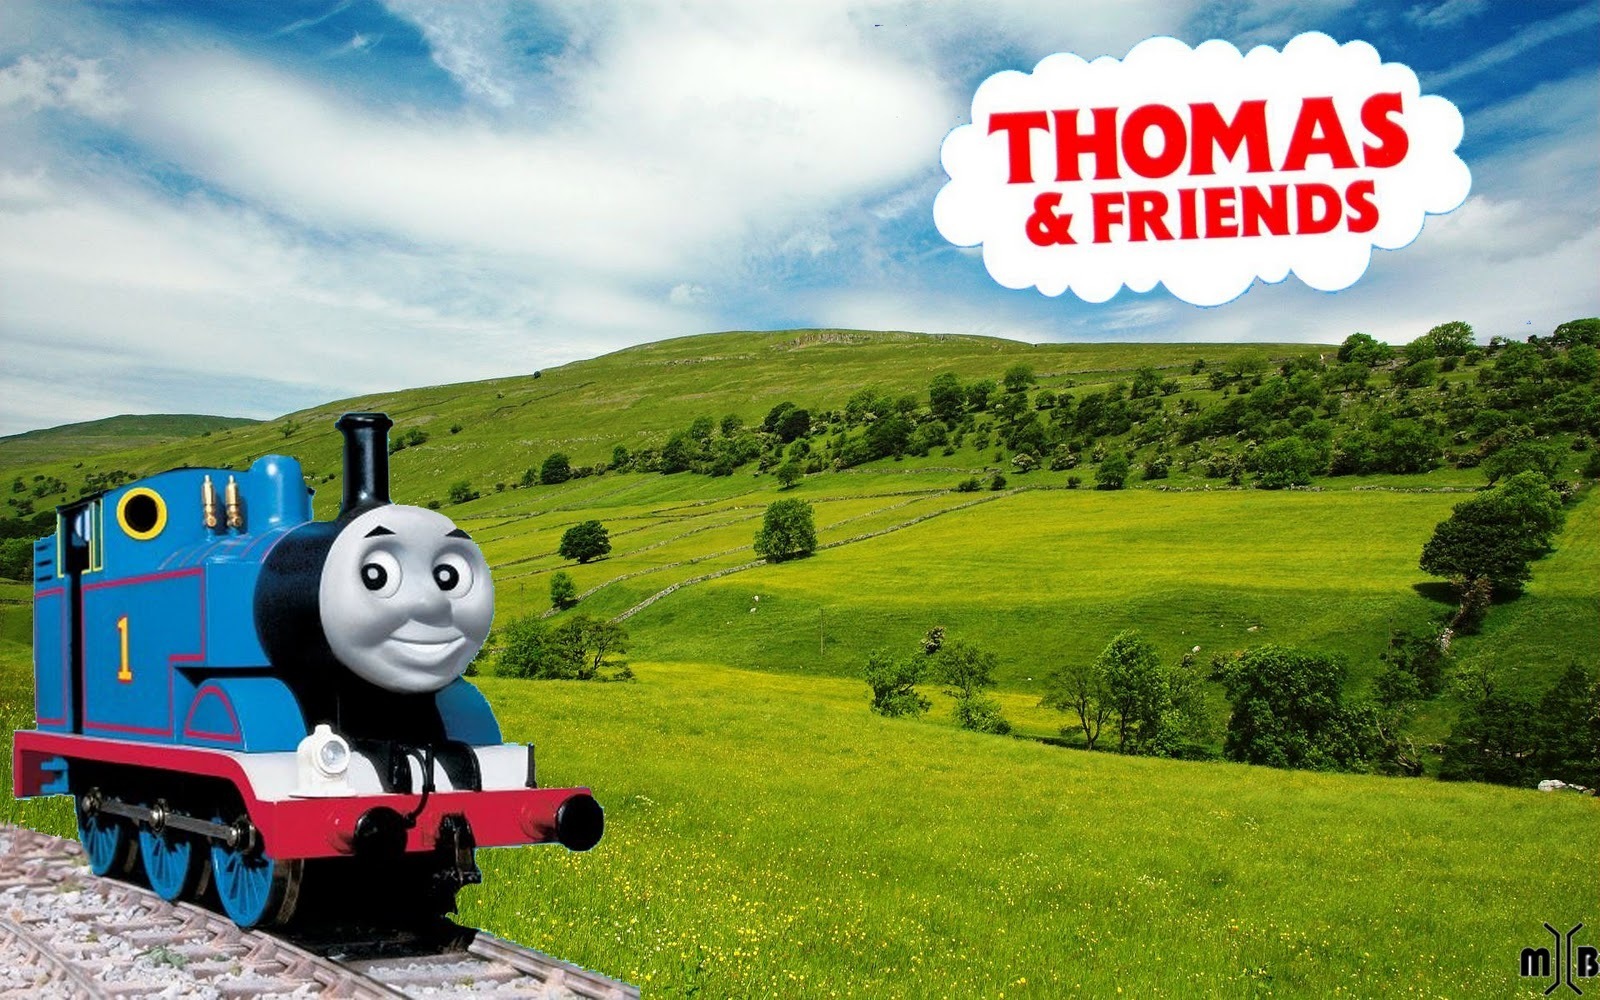 Thomas And Friends Wallpaper - Thomas And Friends Wallpaper ...